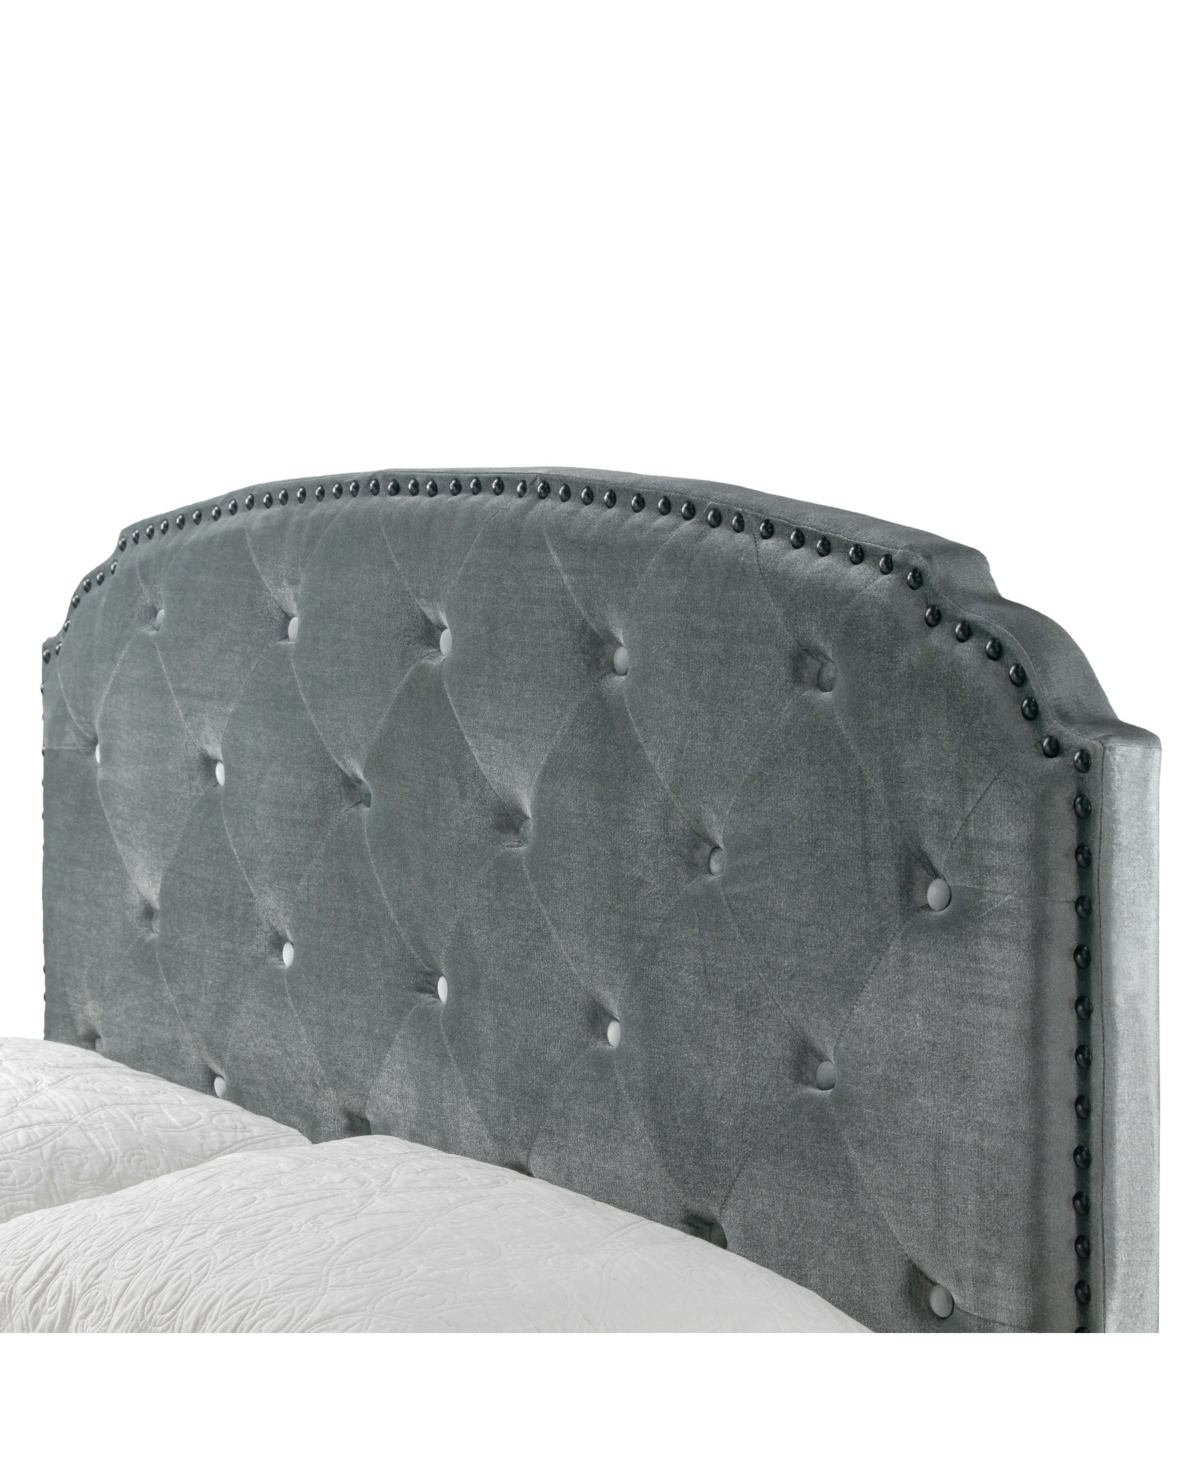 Shop Glamour Home 51.75" Arin Fabric, Rubberwood Queen Bed In Grey